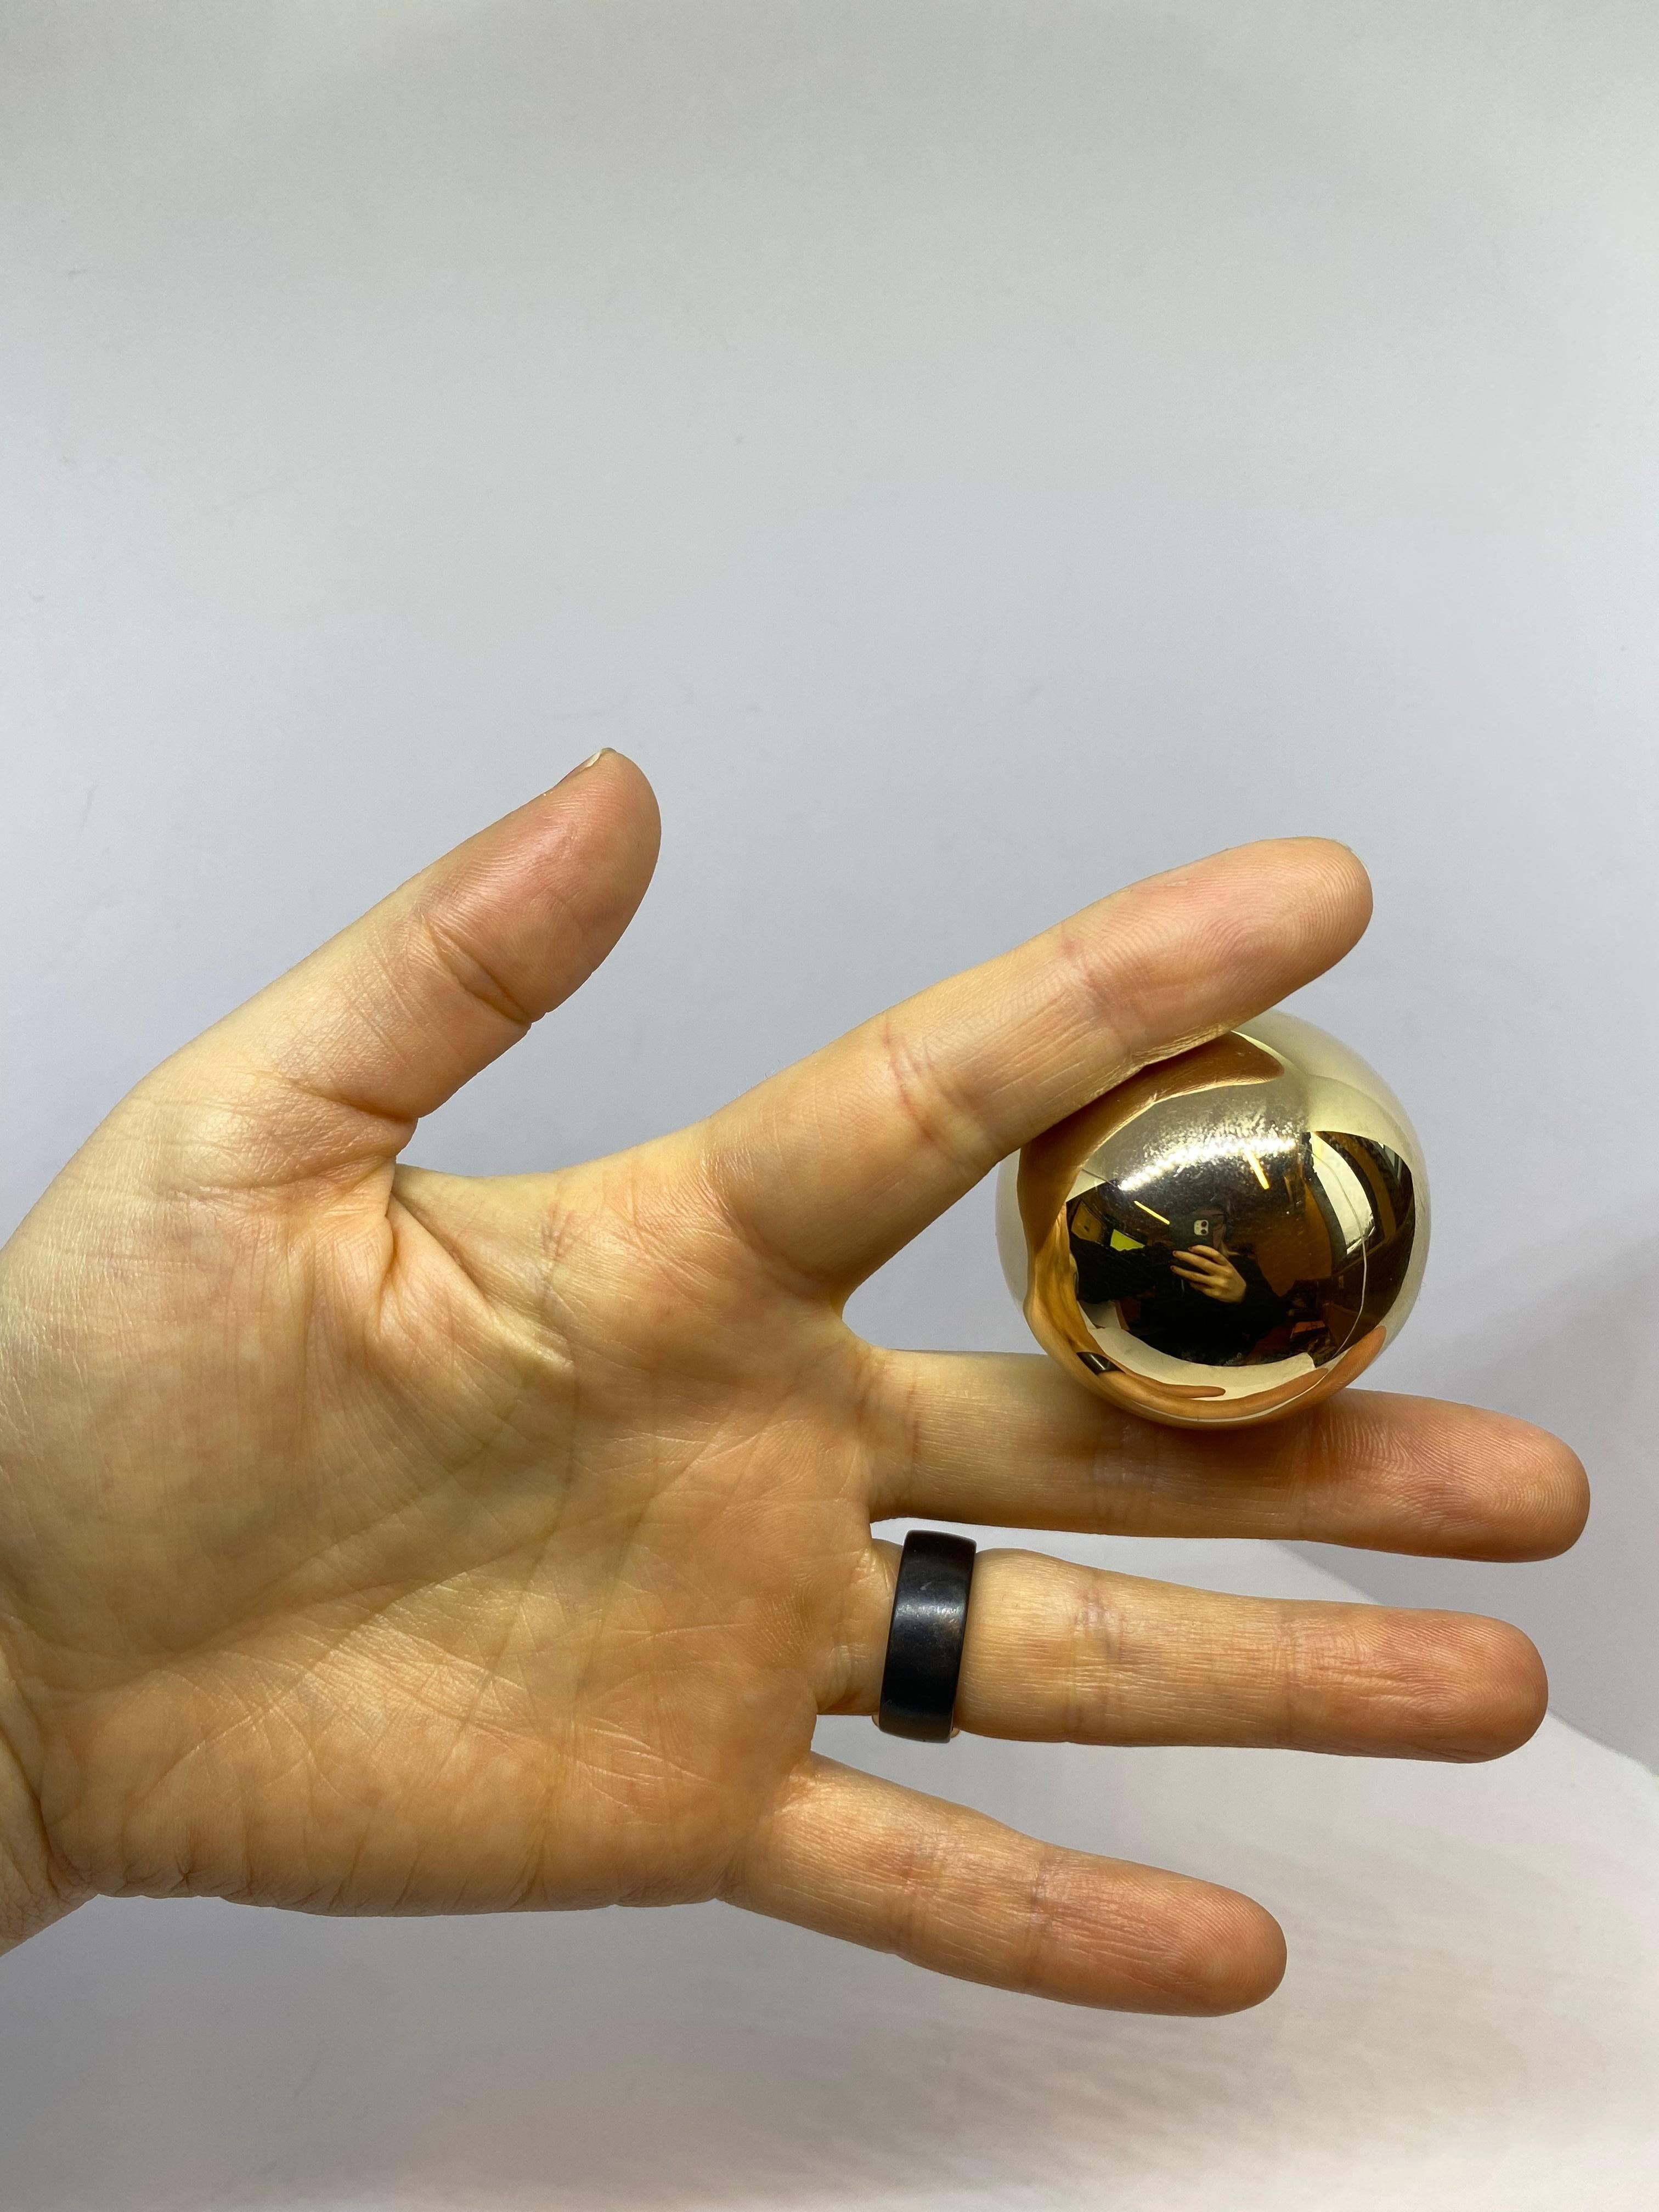 14 Karat Gold Ball, Magic Ball Caviar decorations...

The ball is 14 Karat Gold
585 Proof.
Made in Finland in 1968
Author (RKS) Railo K. Säde Helsinki Finland.
The ball is hollow but still weighs 30G
Included in the picture where the ball was Caviar